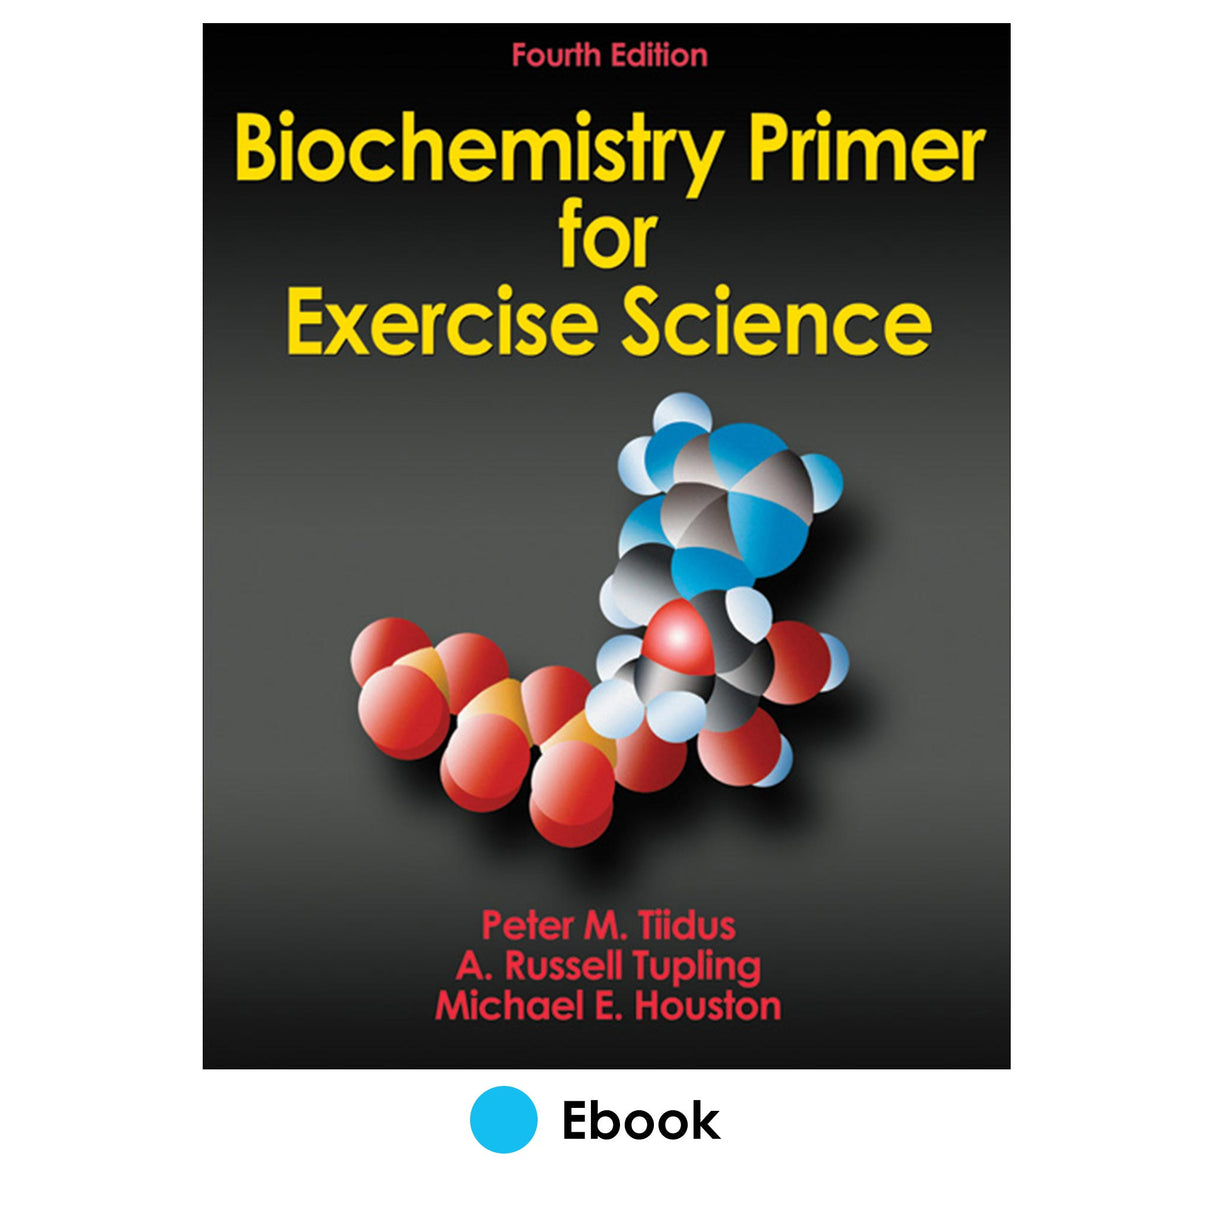 Biochemistry Primer for Exercise Science 4th Edition PDF